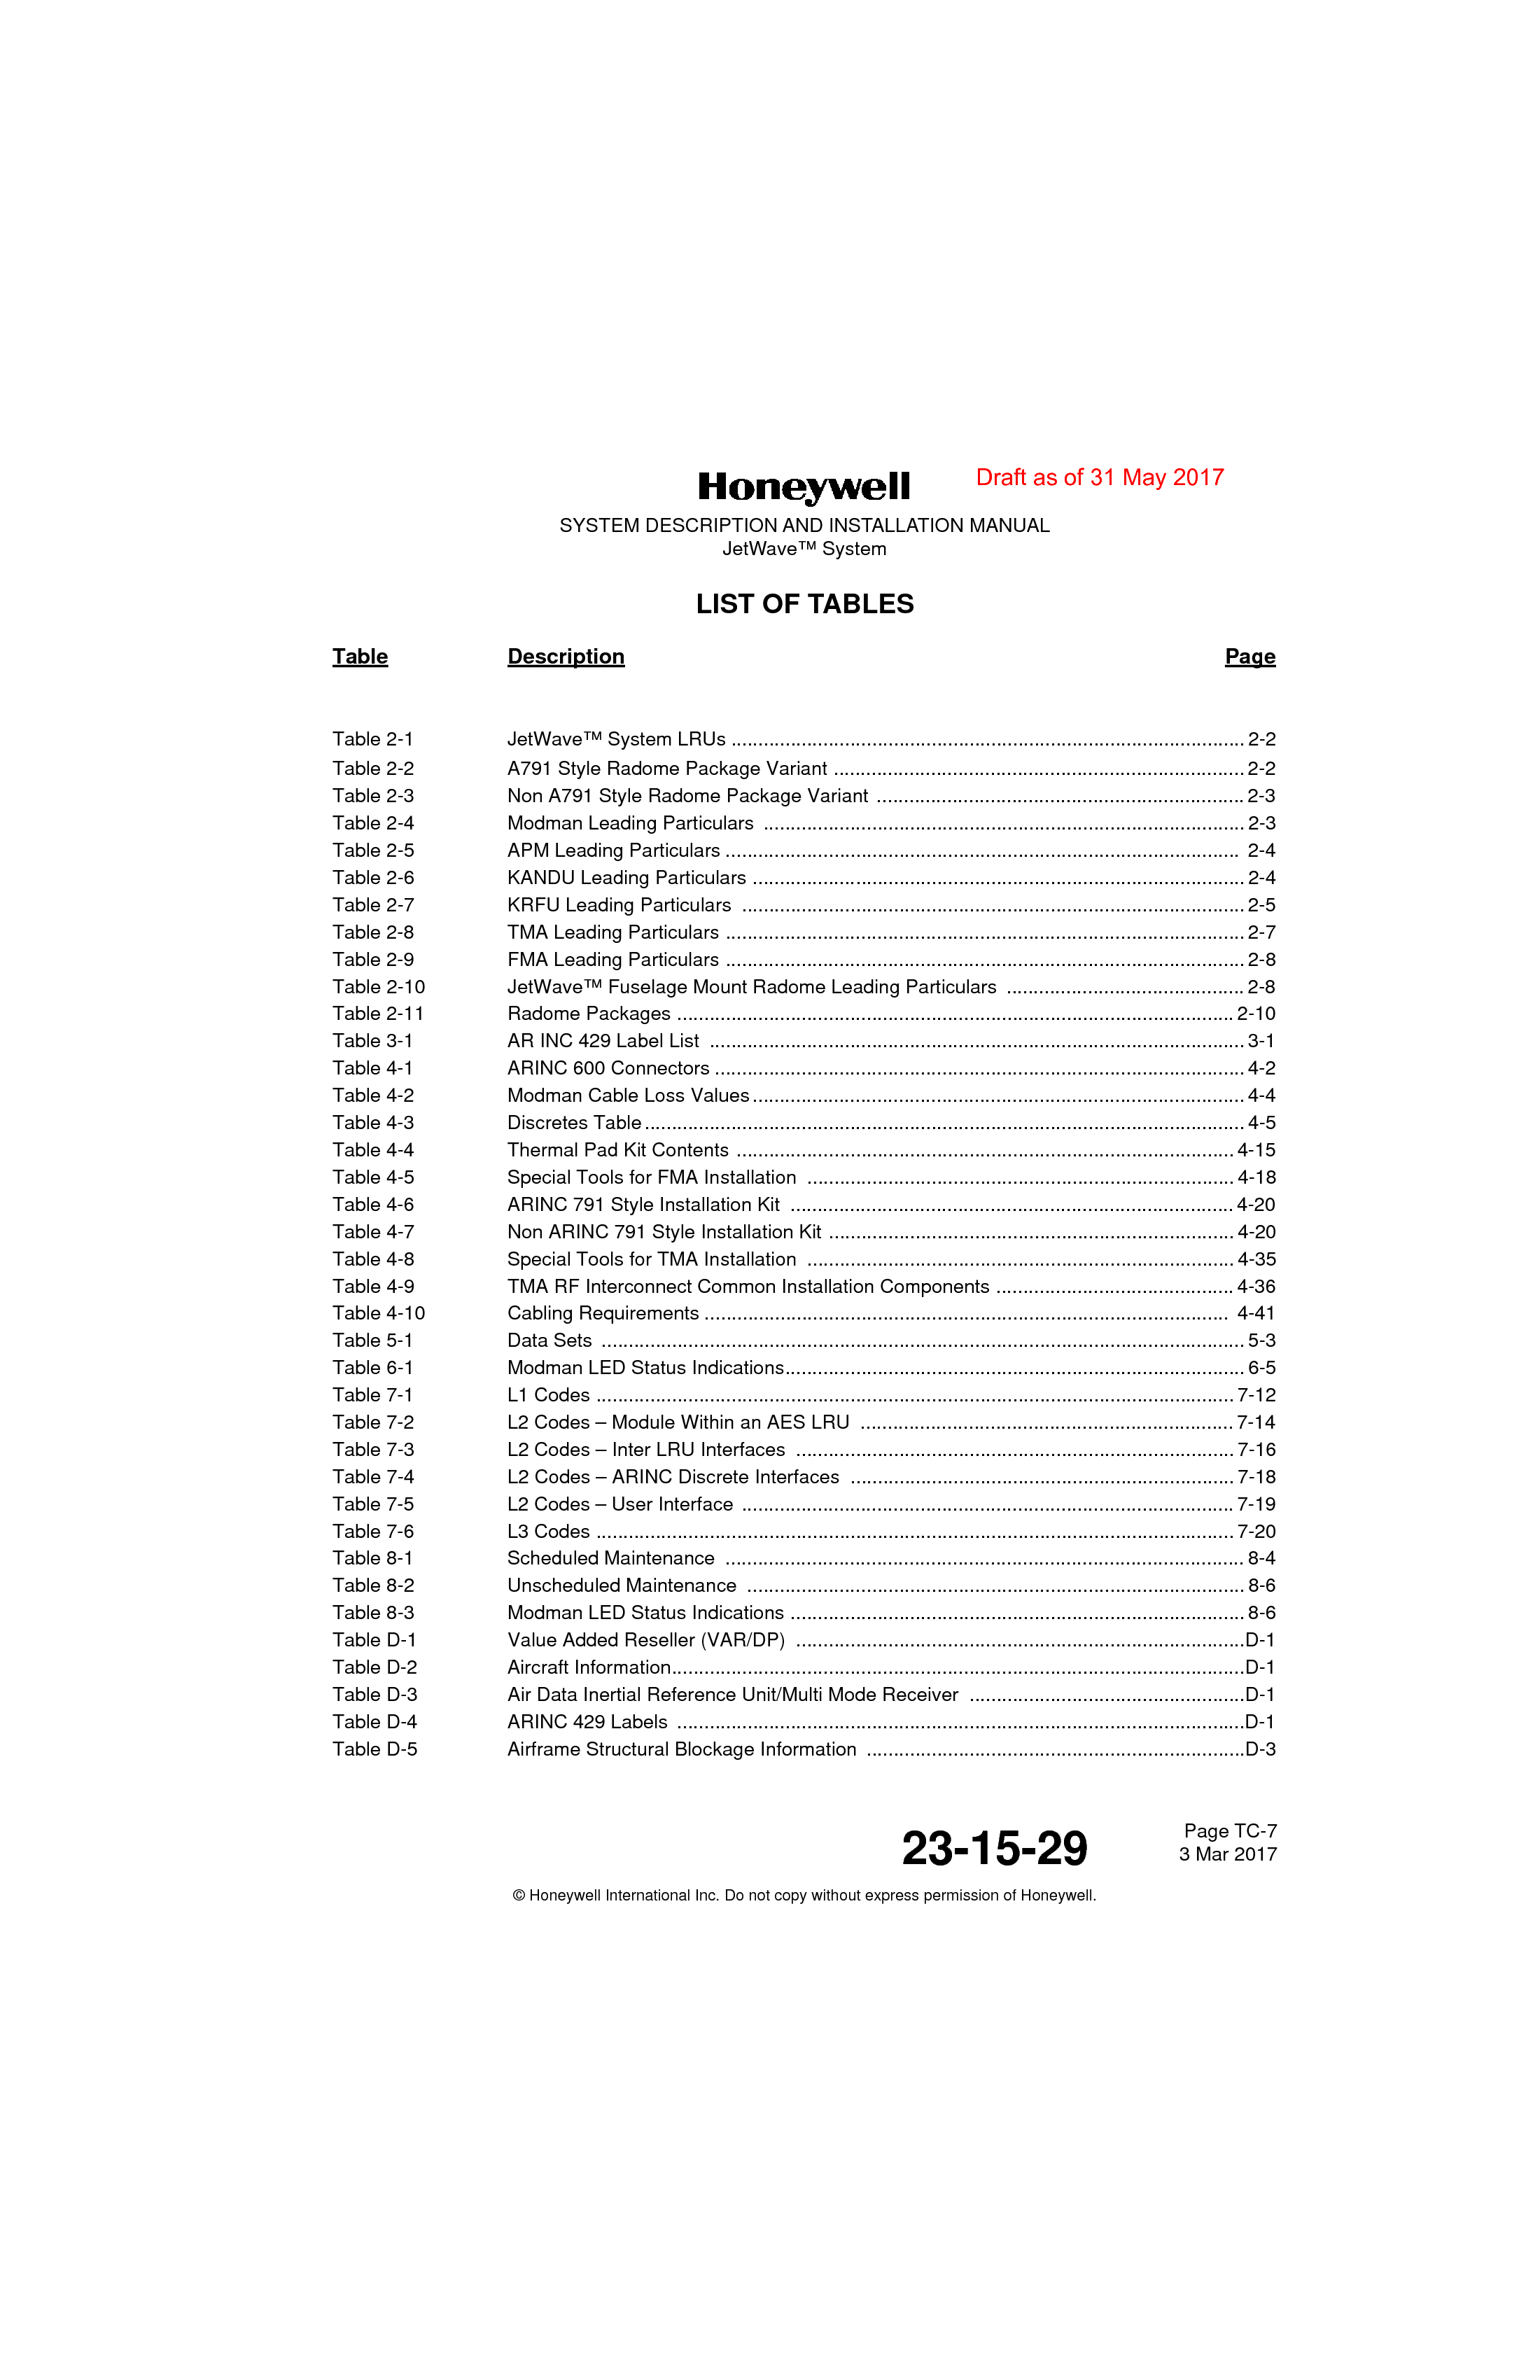 Page TC-7 3 Mar 201723-15-29SYSTEM DESCRIPTION AND INSTALLATION MANUALJetWave™ System© Honeywell International Inc. Do not copy without express permission of Honeywell.LIST OF TABLESTable Description PageTable 2-1 JetWave™ System LRUs ............................................................................................... 2-2Table 2-2 A791 Style Radome Package Variant ............................................................................ 2-2Table 2-3 Non A791 Style Radome Package Variant .................................................................... 2-3Table 2-4 Modman Leading Particulars  ......................................................................................... 2-3Table 2-5 APM Leading Particulars ...............................................................................................  2-4Table 2-6 KANDU Leading Particulars ........................................................................................... 2-4Table 2-7 KRFU Leading Particulars  ............................................................................................. 2-5Table 2-8 TMA Leading Particulars ................................................................................................ 2-7Table 2-9 FMA Leading Particulars ................................................................................................ 2-8Table 2-10 JetWave™ Fuselage Mount Radome Leading Particulars  ............................................ 2-8Table 2-11 Radome Packages ....................................................................................................... 2-10Table 3-1 AR INC 429 Label List  ................................................................................................... 3-1Table 4-1 ARINC 600 Connectors .................................................................................................. 4-2Table 4-2 Modman Cable Loss Values........................................................................................... 4-4Table 4-3 Discretes Table............................................................................................................... 4-5Table 4-4 Thermal Pad Kit Contents ............................................................................................ 4-15Table 4-5 Special Tools for FMA Installation ............................................................................... 4-18Table 4-6 ARINC 791 Style Installation Kit  .................................................................................. 4-20Table 4-7 Non ARINC 791 Style Installation Kit ........................................................................... 4-20Table 4-8 Special Tools for TMA Installation ............................................................................... 4-35Table 4-9 TMA RF Interconnect Common Installation Components ............................................ 4-36Table 4-10 Cabling Requirements .................................................................................................  4-41Table 5-1 Data Sets  ....................................................................................................................... 5-3Table 6-1 Modman LED Status Indications..................................................................................... 6-5Table 7-1 L1 Codes ...................................................................................................................... 7-12Table 7-2 L2 Codes – Module Within an AES LRU  ..................................................................... 7-14Table 7-3 L2 Codes – Inter LRU Interfaces  ................................................................................. 7-16Table 7-4 L2 Codes – ARINC Discrete Interfaces  ....................................................................... 7-18Table 7-5 L2 Codes – User Interface ........................................................................................... 7-19Table 7-6 L3 Codes ...................................................................................................................... 7-20Table 8-1 Scheduled Maintenance  ................................................................................................ 8-4Table 8-2 Unscheduled Maintenance  ............................................................................................ 8-6Table 8-3 Modman LED Status Indications .................................................................................... 8-6Table D-1 Value Added Reseller (VAR/DP)  ...................................................................................D-1Table D-2 Aircraft Information..........................................................................................................D-1Table D-3 Air Data Inertial Reference Unit/Multi Mode Receiver  ...................................................D-1Table D-4 ARINC 429 Labels  .........................................................................................................D-1Table D-5 Airframe Structural Blockage Information  ......................................................................D-3Draft as of 31 May 2017